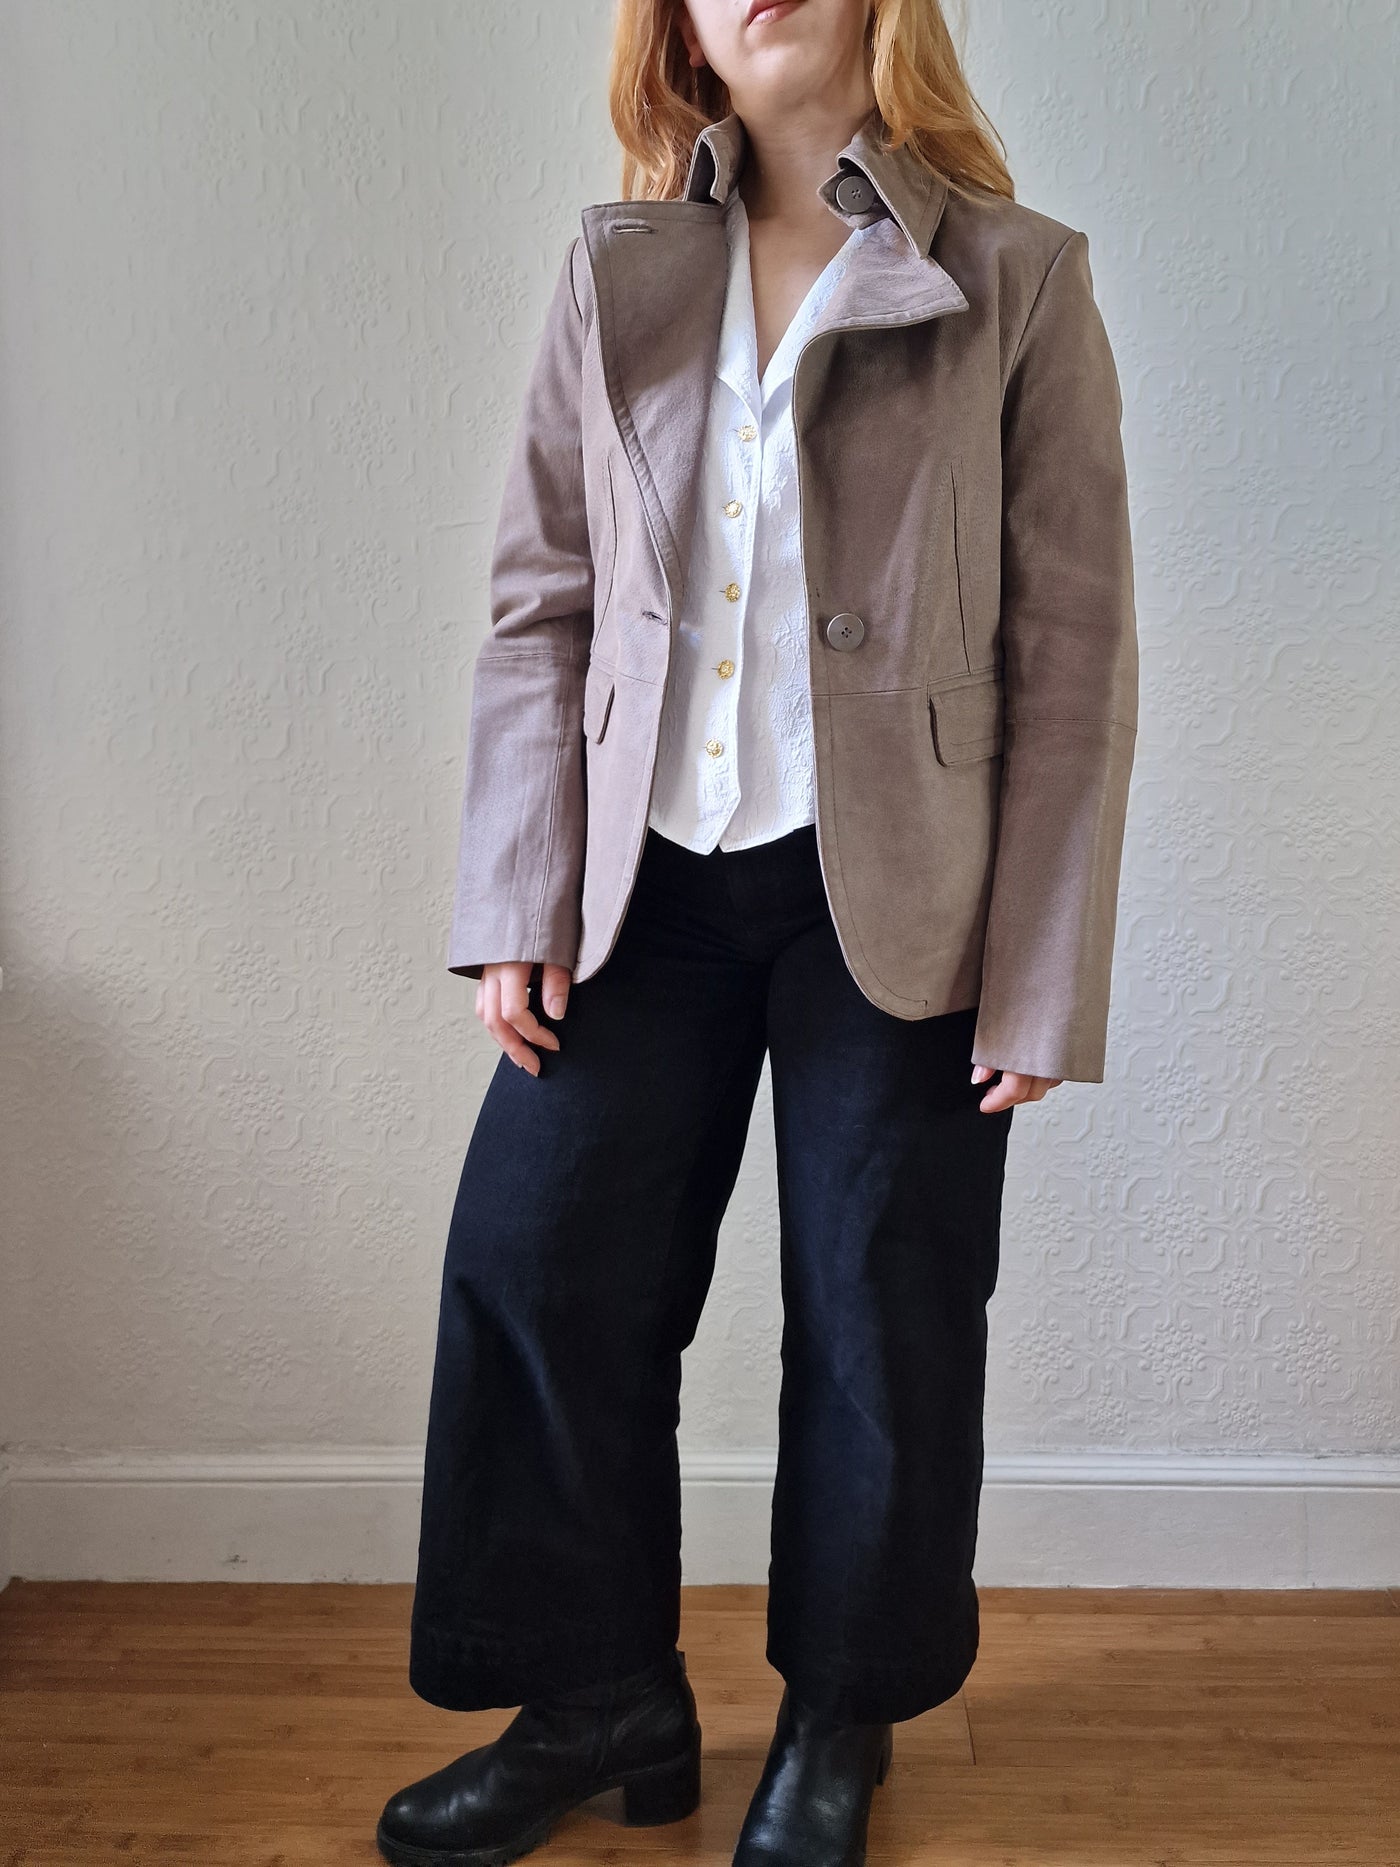 Vintage 90s Grey Taupe Genuine Suede Leather Jacket with Pointy Lapel - XS/S